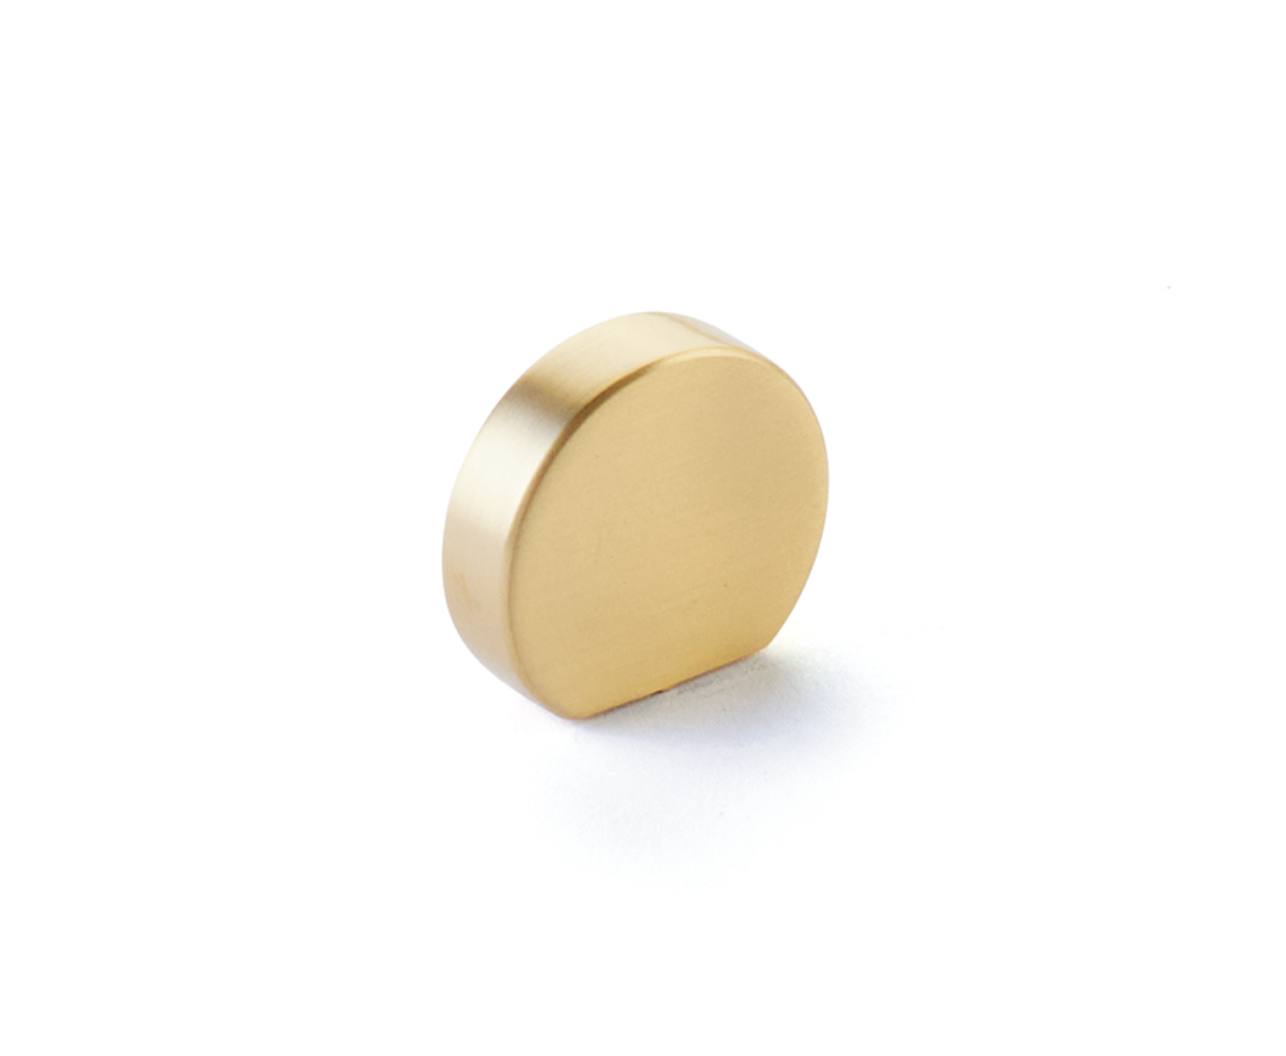 Satin Brass "Bit" Rounded Drawer Pulls and Cabinet Knobs